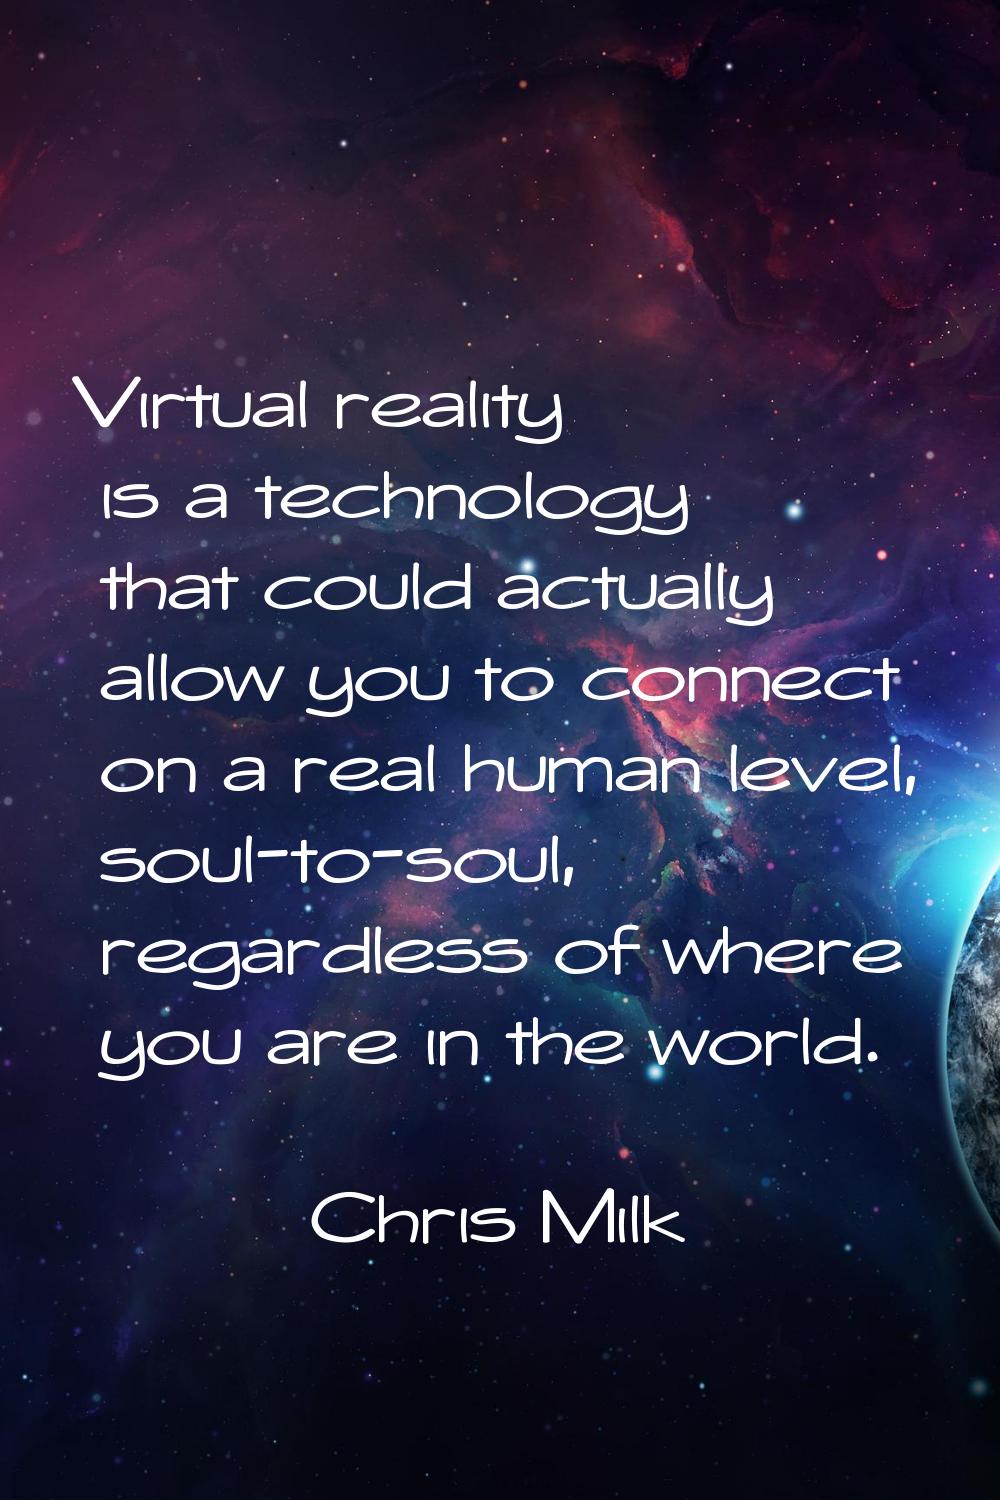 Virtual reality is a technology that could actually allow you to connect on a real human level, sou